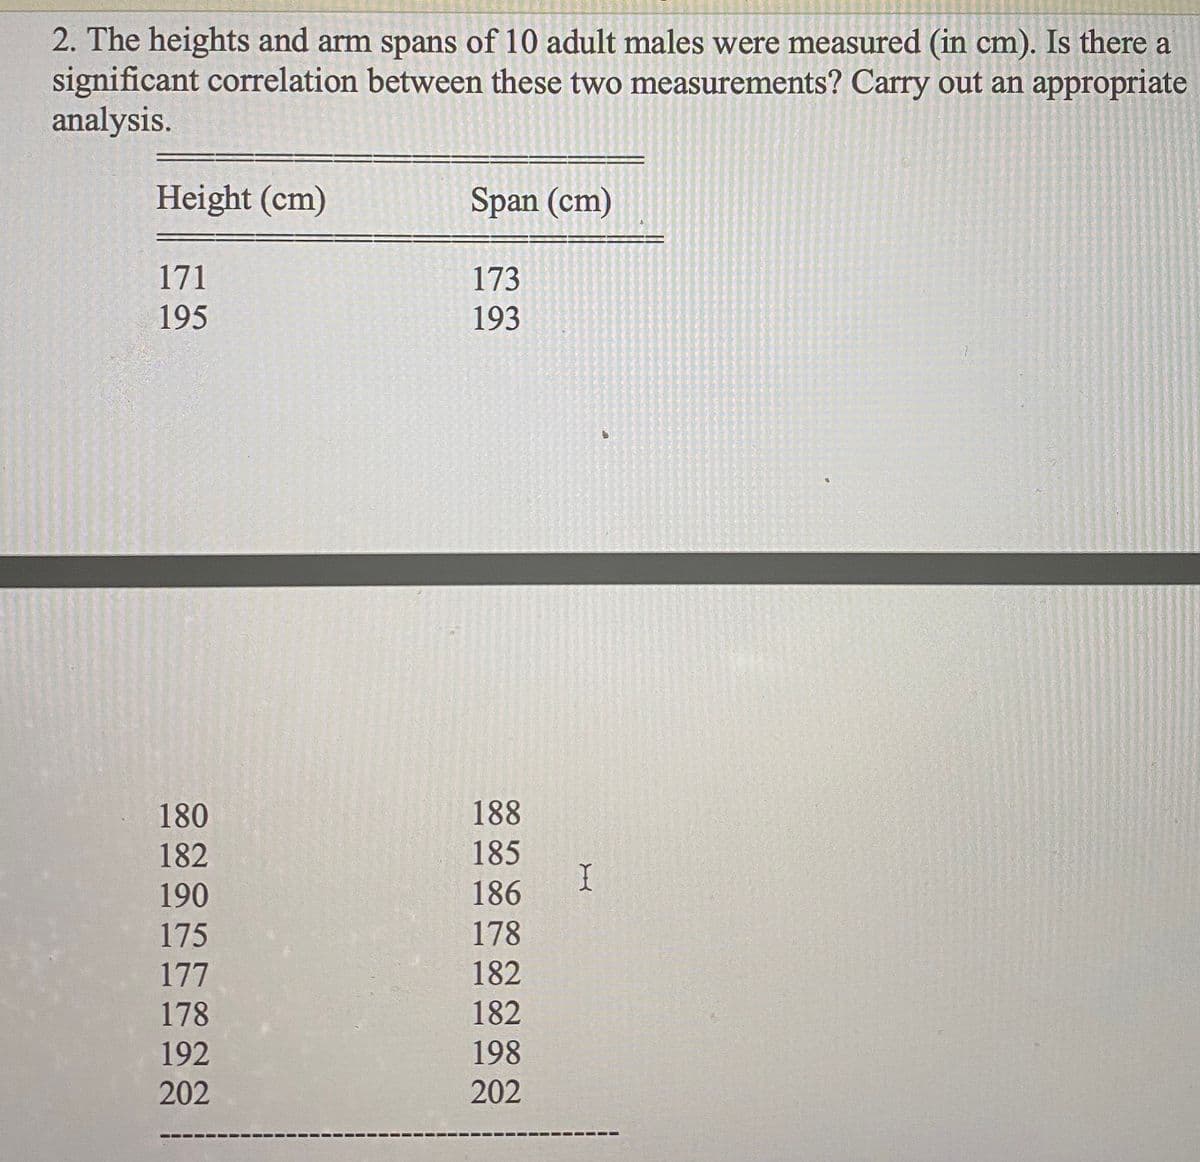 2. The heights and arm spans of 10 adult males were measured (in cm). Is there a
significant correlation between these two measurements? Carry out an appropriate
analysis.
Height (cm)
Span (cm)
171
173
195
193
180
188
182
185
190
186
175
178
177
182
178
182
192
198
202
202
